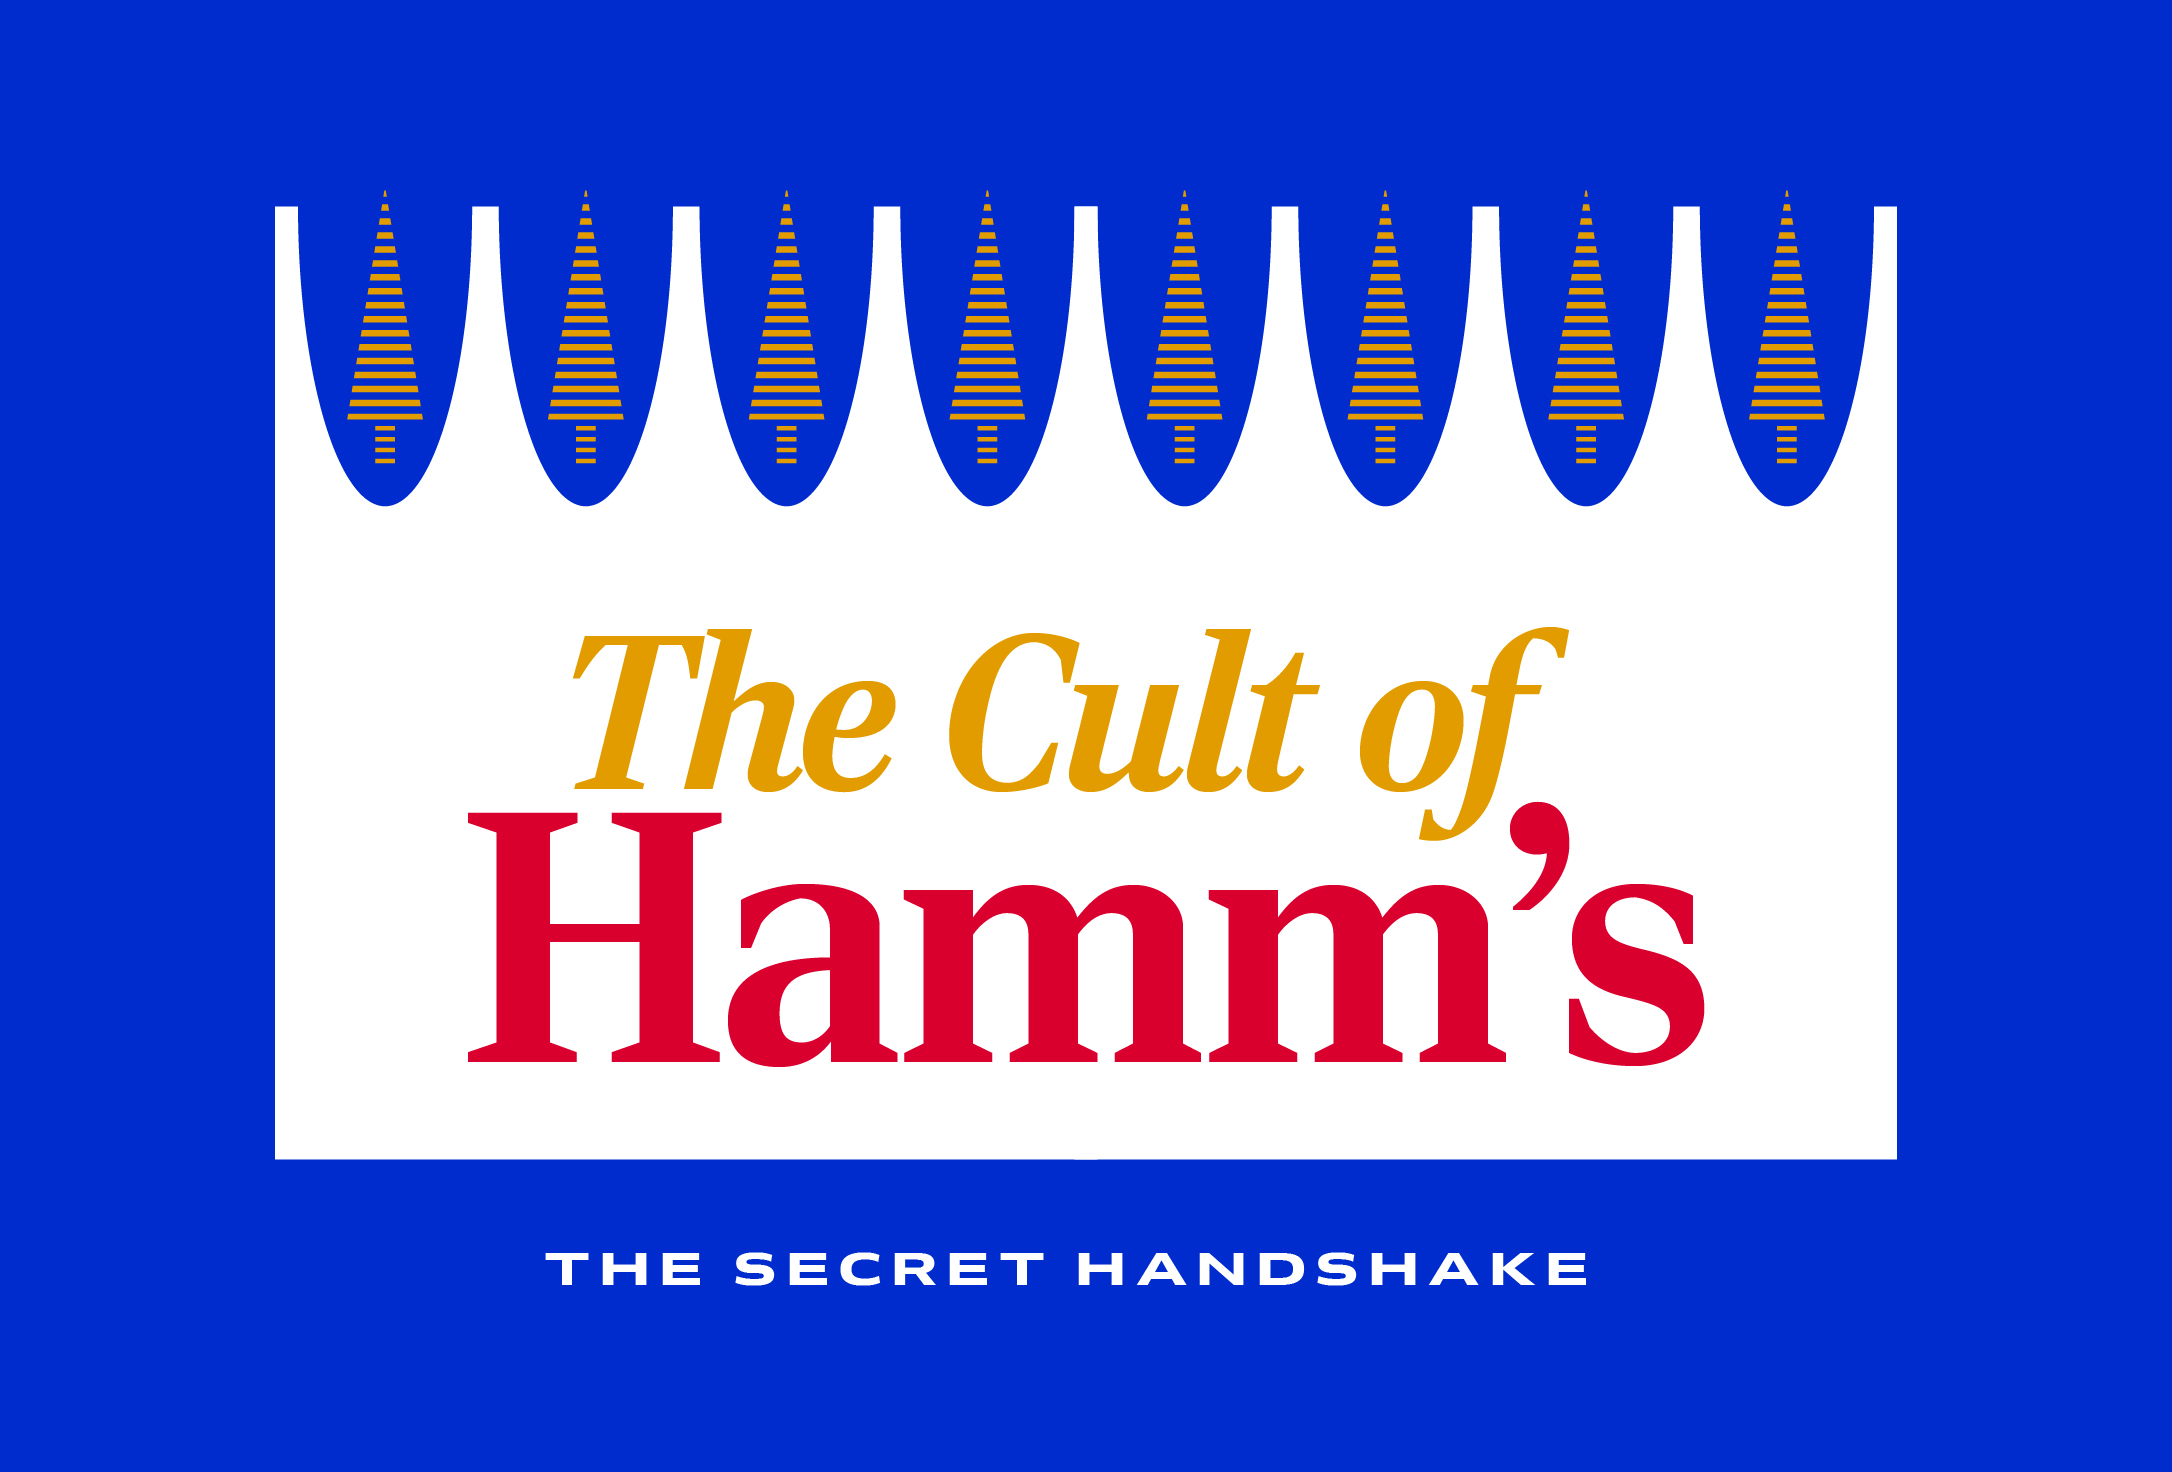 Get Me a Slice of Some Hamm’s